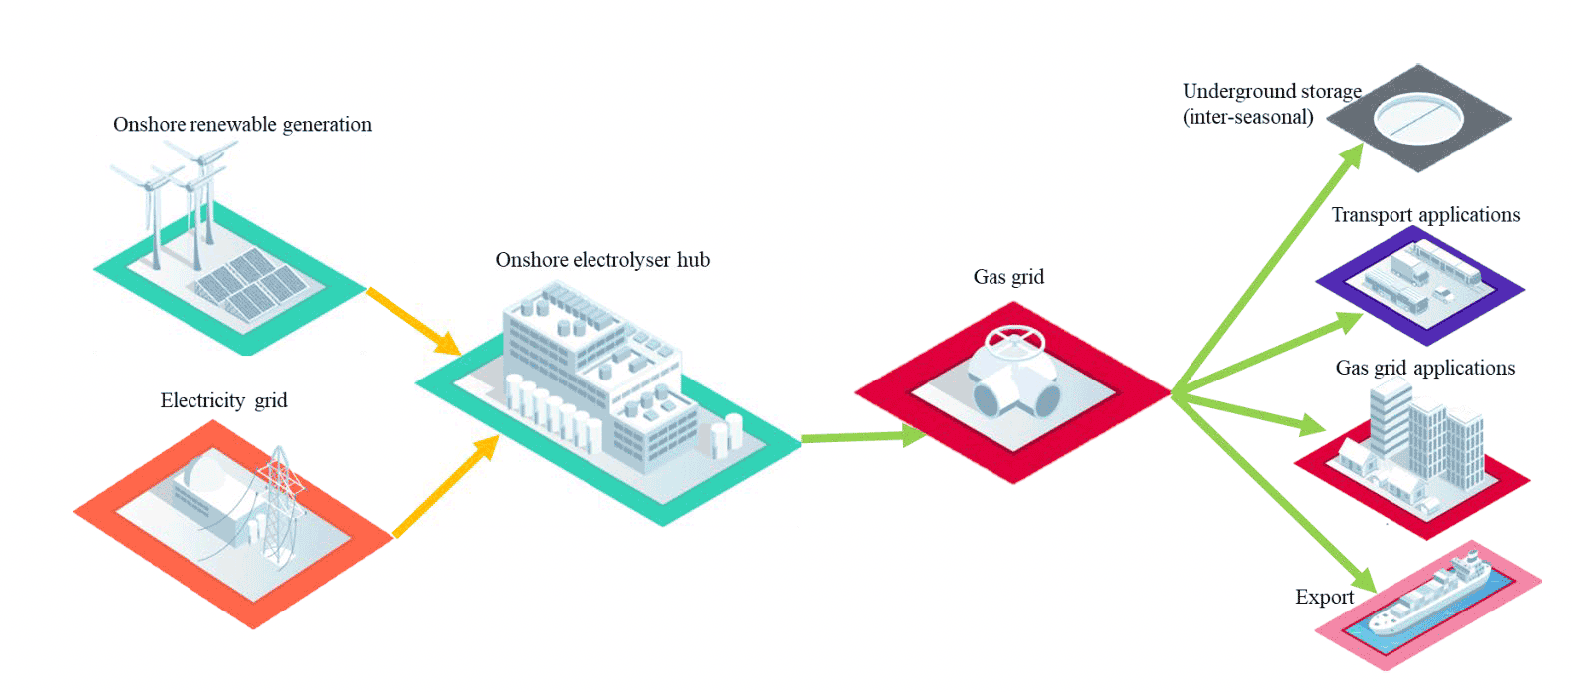 Diagram of large-scale centralised hydrogen production. Onshore renewable electricity generation and the electricity grid feeds an onshore electrolyser hub. The hydrogen produced is then injected into the local gas grid and either stored as interseasonal storage, used in transport, used in gas grid applications or exported through a port facility.